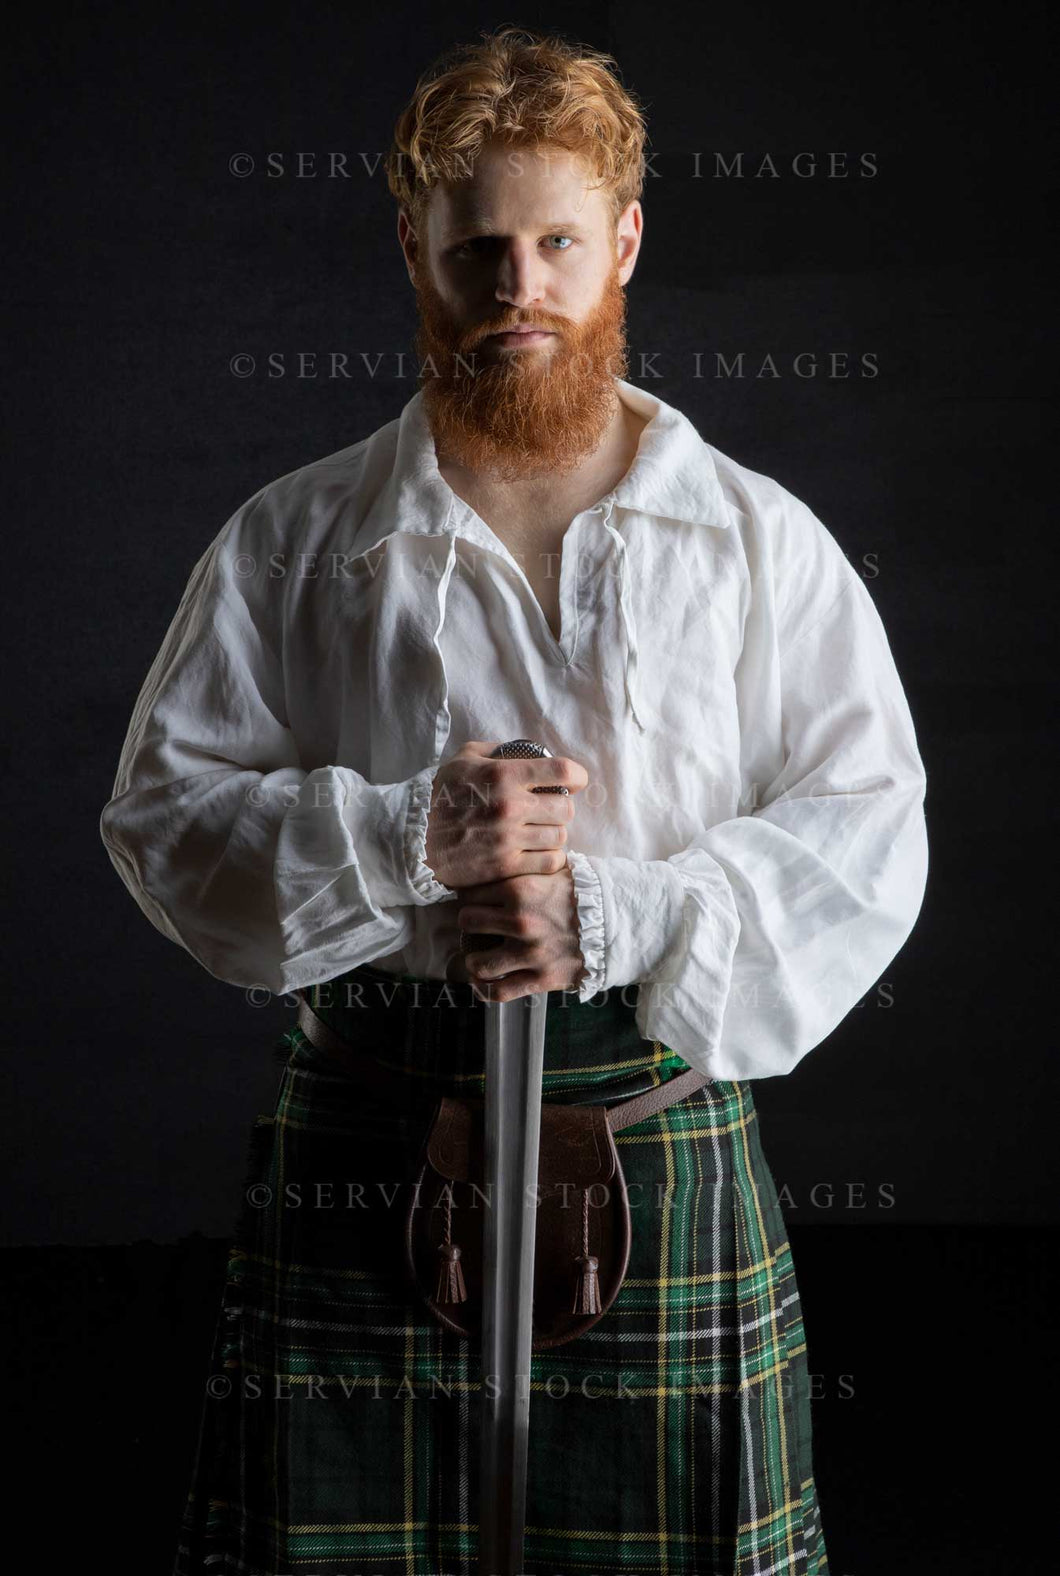 Scotsman with red hair and beard wearing a kilt and linen shirt against a black backdrop (Luke 3235)